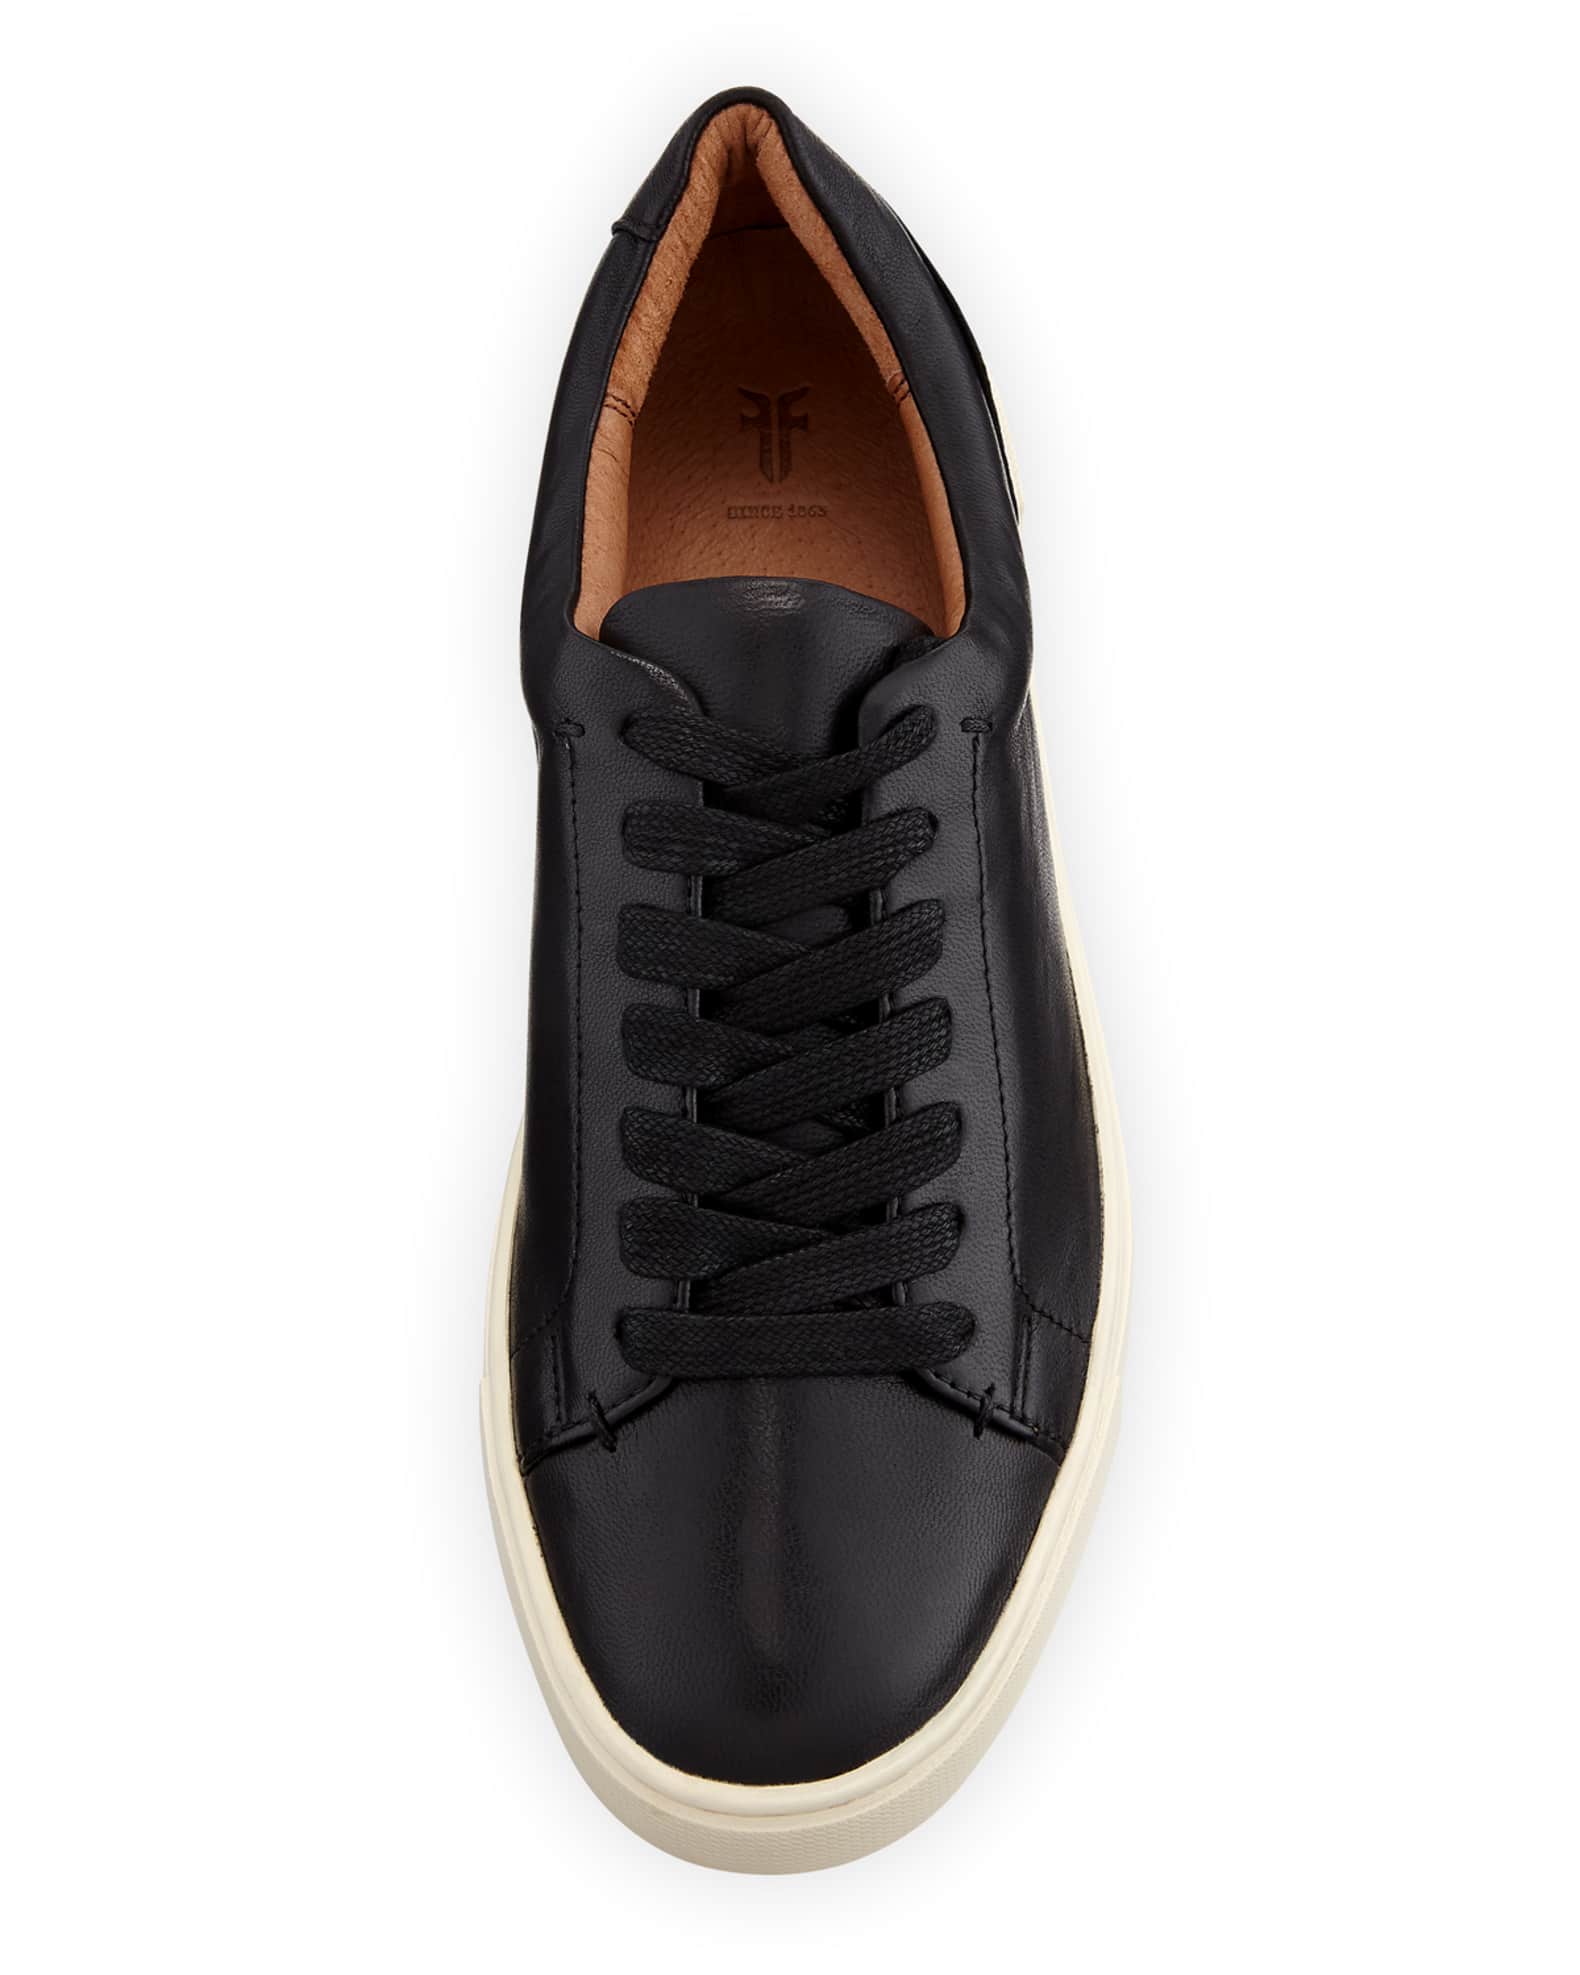 Frye Ivy Soft Leather Lace-Up Low-Top Sneakers | Neiman Marcus